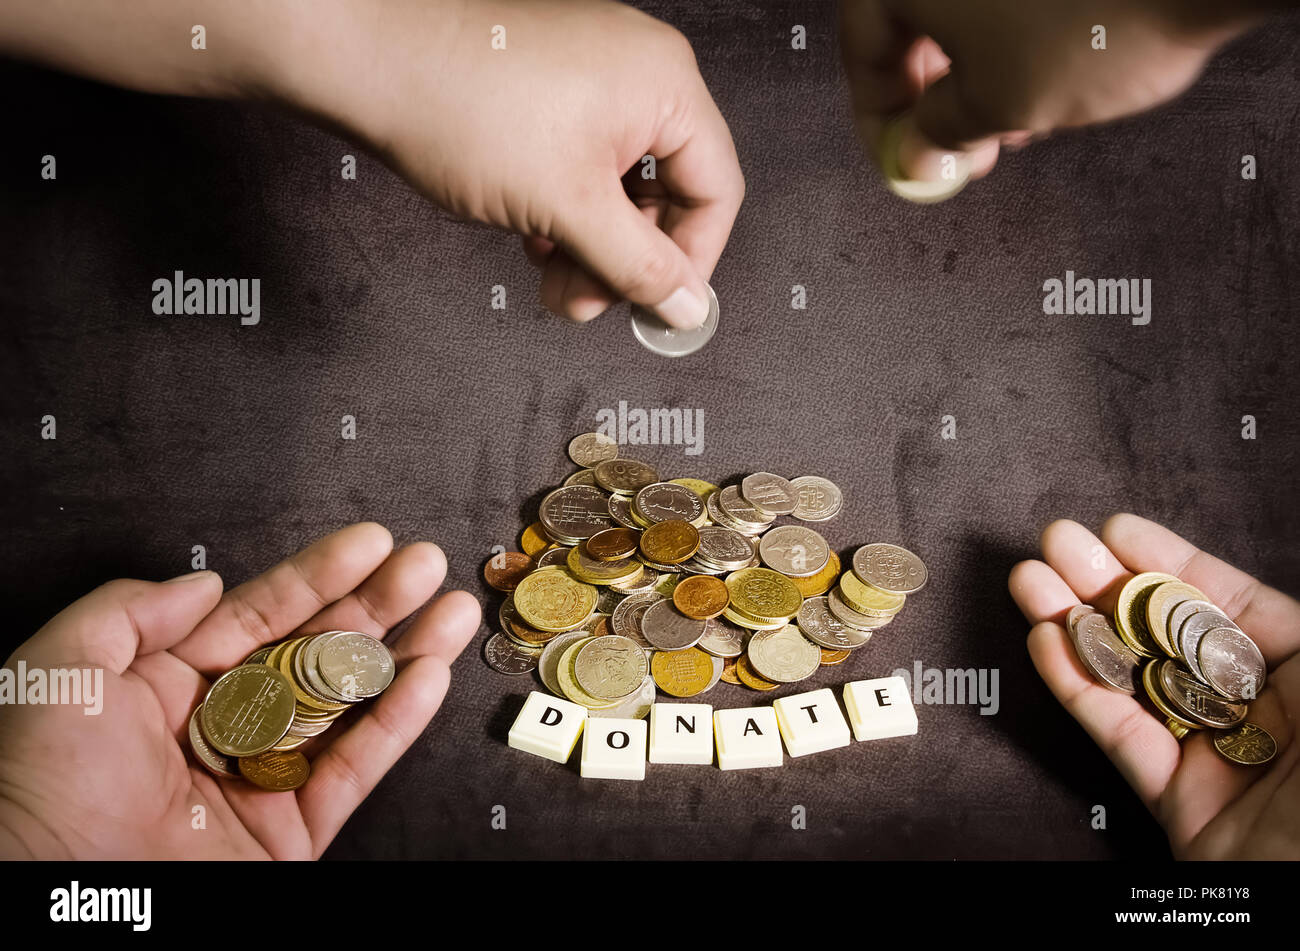 Money donation concept, a call for a fund raising for a purpose Stock Photo